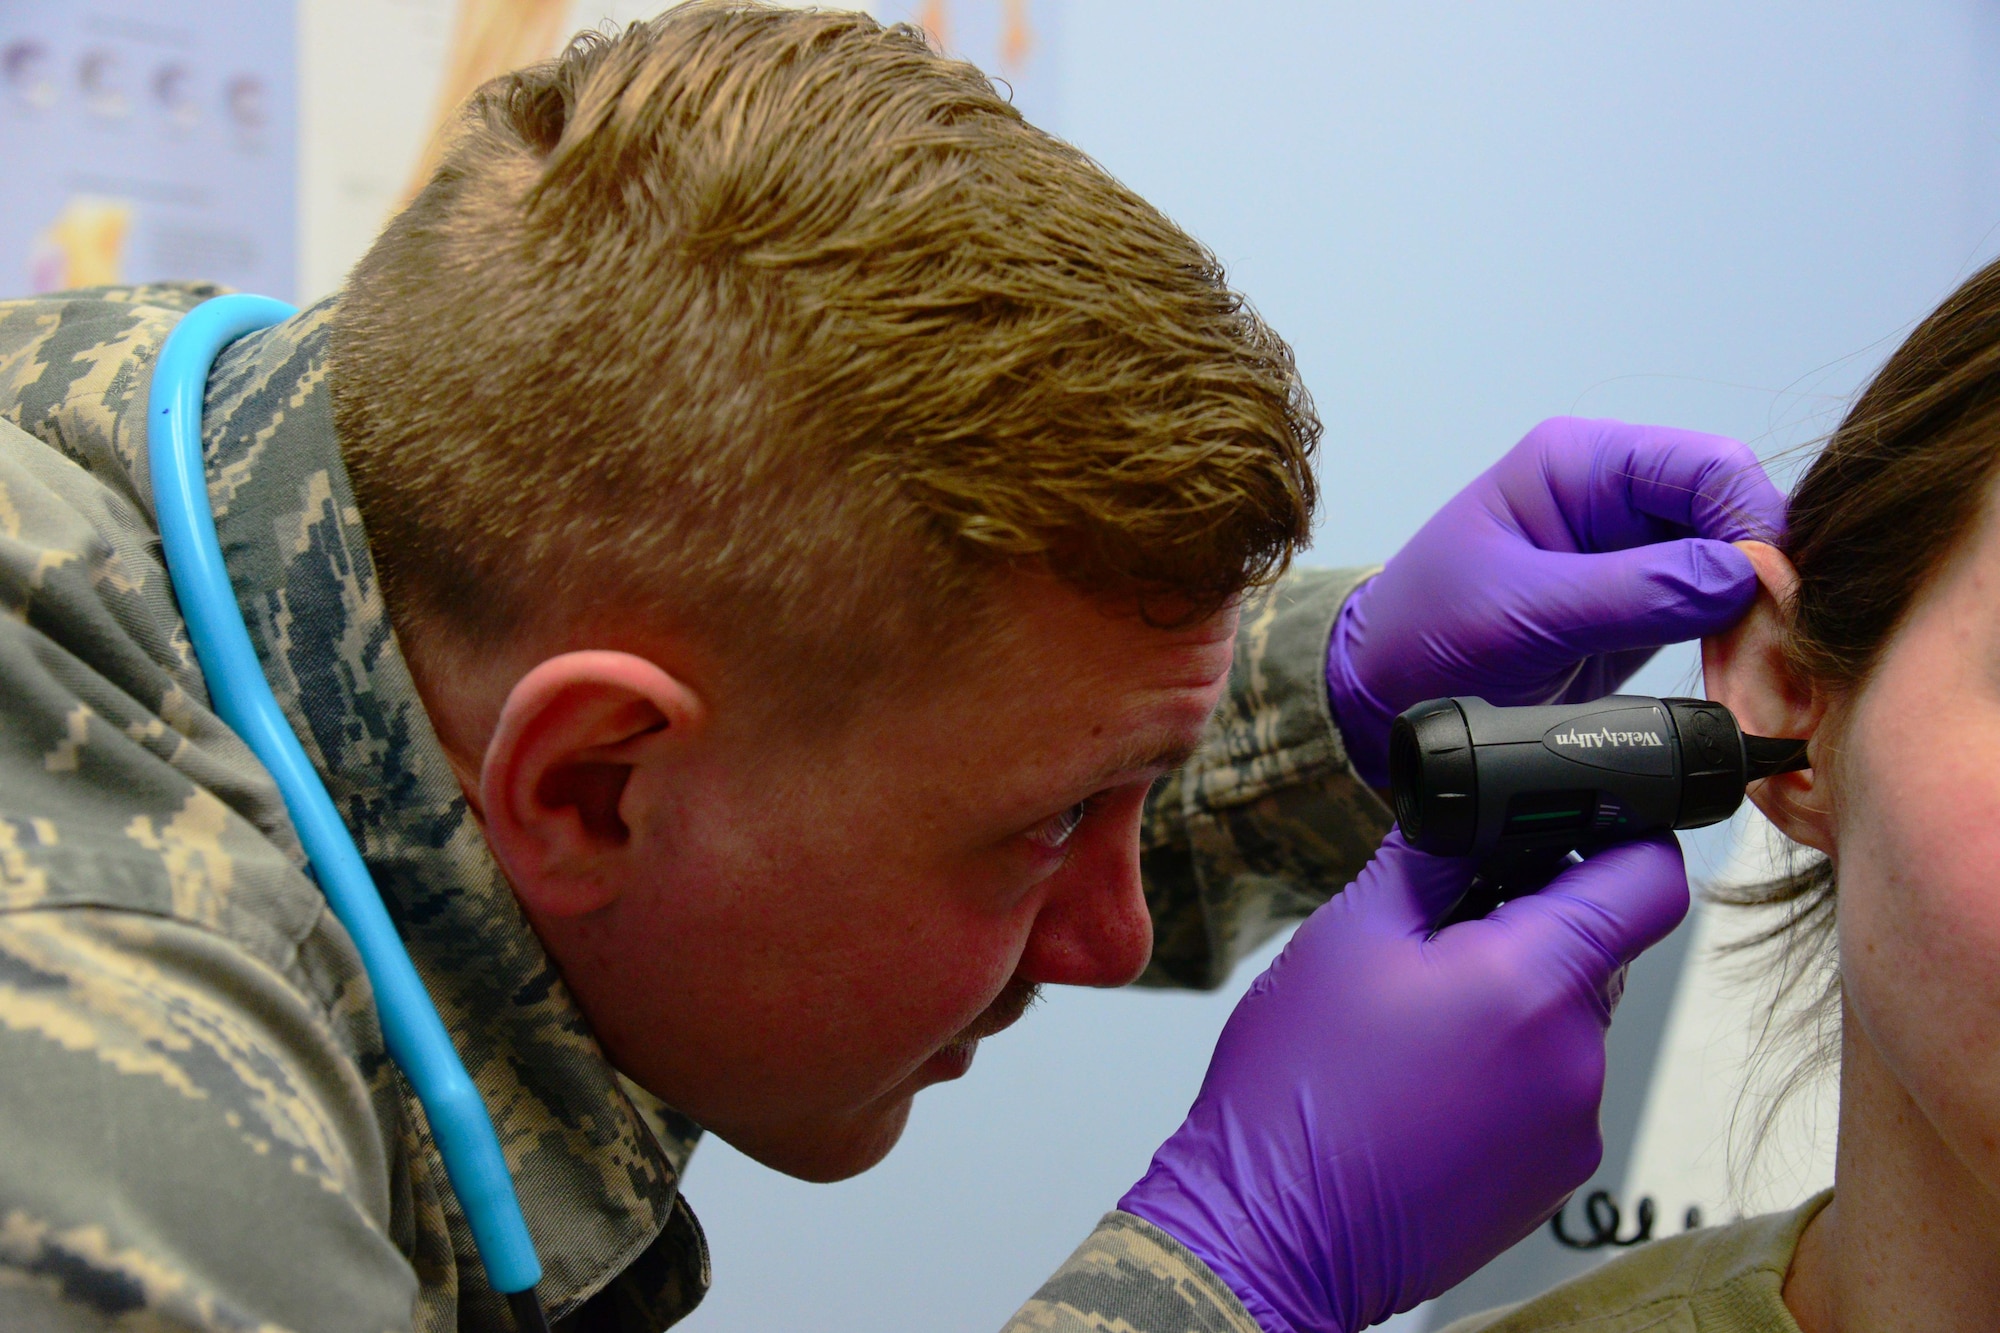 Senior Airman Nathaniel Morris, 341st Medical Operation Squadron personnel reliability assurance program clinic technician, performs a preliminary vitals check on a simulated patient Jan. 30, 2017, at Malmstrom Air Force Base, Mont. PRAP technicians assist physicians with patients’ medical needs by measuring vitals, conducting a general health questionnaire upon a patient’s arrival, and in some cases are also trained on administering medical treatments once certified. (U.S. Air Force photo/Airman 1st Class Magen M. Reeves)